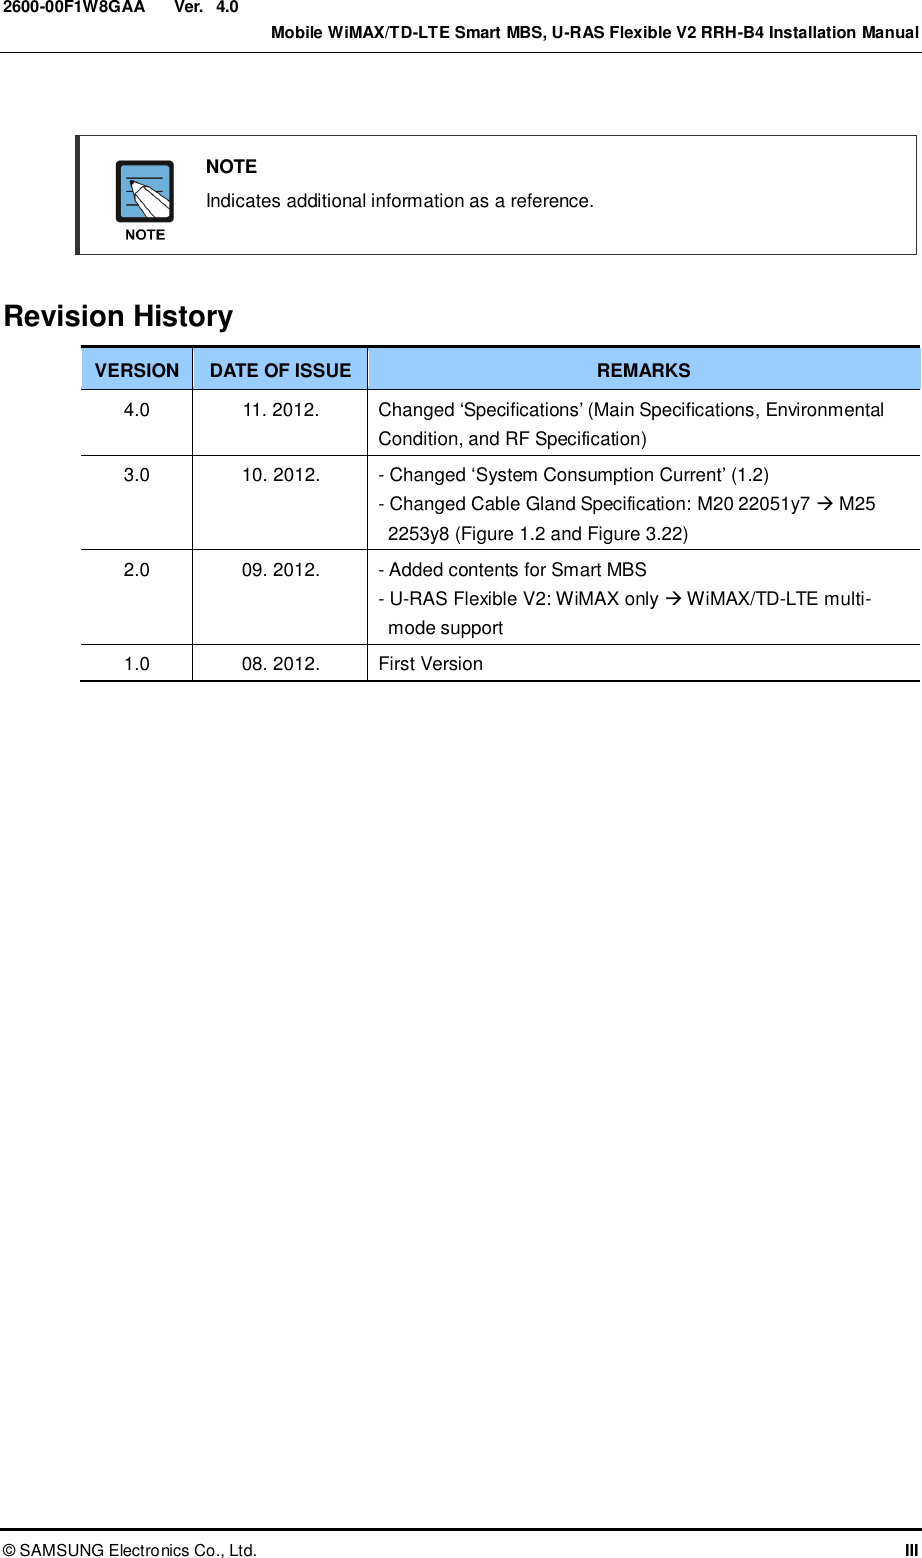  Ver.    Mobile WiMAX/TD-LTE Smart MBS, U-RAS Flexible V2 RRH-B4 Installation Manual ©  SAMSUNG Electronics Co., Ltd.  III 2600-00F1W8GAA 4.0   NOTE   Indicates additional information as a reference.   Revision History VERSION DATE OF ISSUE REMARKS 4.0 11. 2012. Changed ‘Specifications’ (Main Specifications, Environmental Condition, and RF Specification) 3.0 10. 2012. - Changed ‘System Consumption Current’ (1.2) - Changed Cable Gland Specification: M20 22051y7  M25 2253y8 (Figure 1.2 and Figure 3.22) 2.0 09. 2012. - Added contents for Smart MBS - U-RAS Flexible V2: WiMAX only  WiMAX/TD-LTE multi-mode support 1.0 08. 2012. First Version  